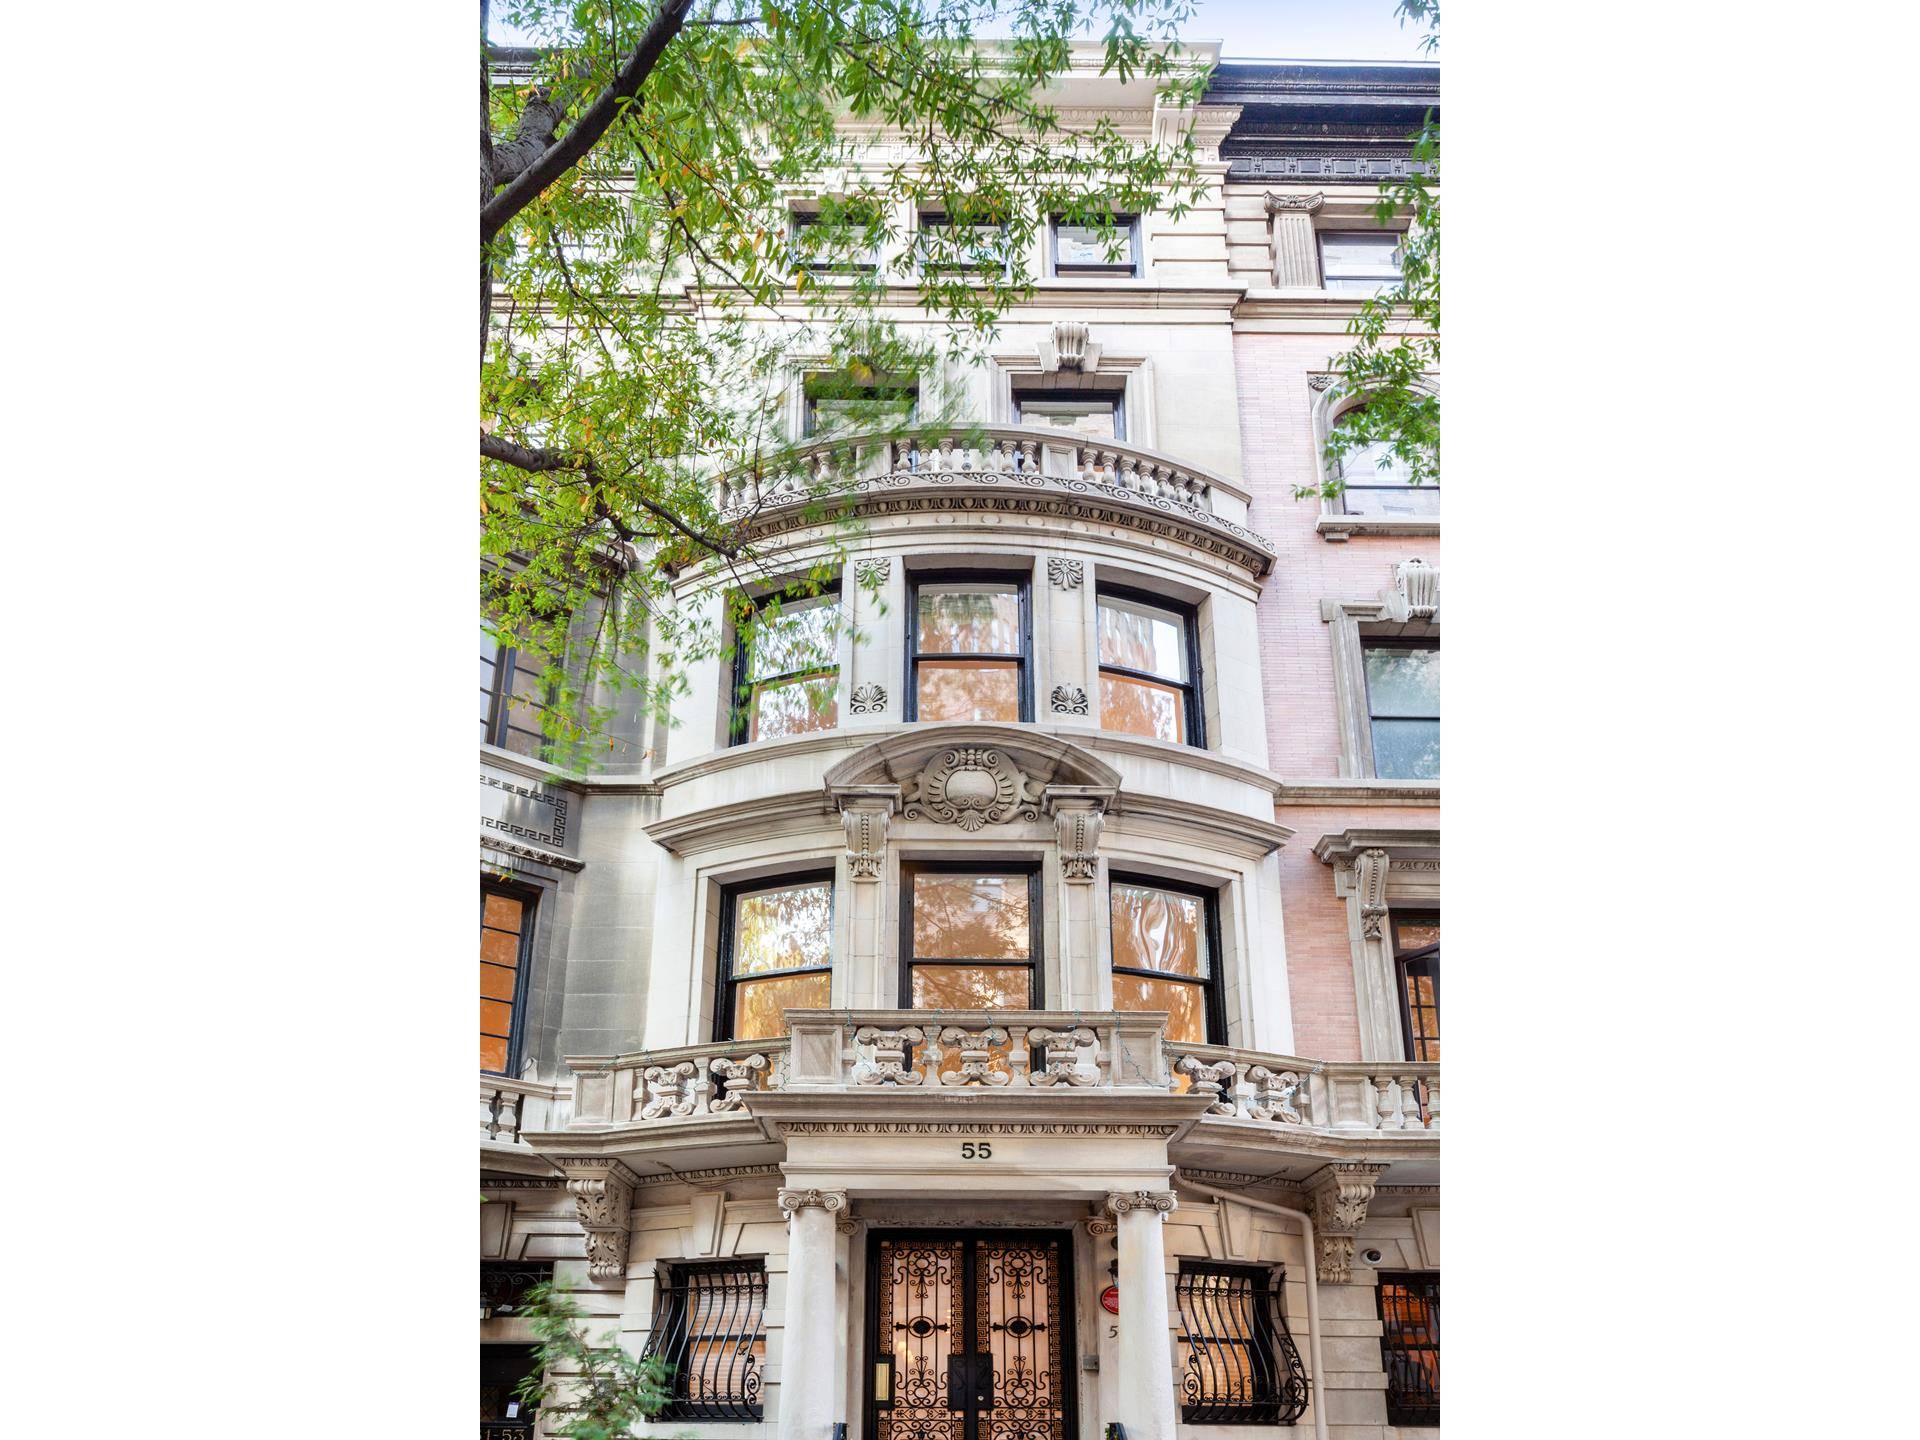 A landmark of the utmost pedigree, this five story single family townhouse was once the New York residence of diplomat, humanitarian and First Lady of the United States, Eleanor Roosevelt.